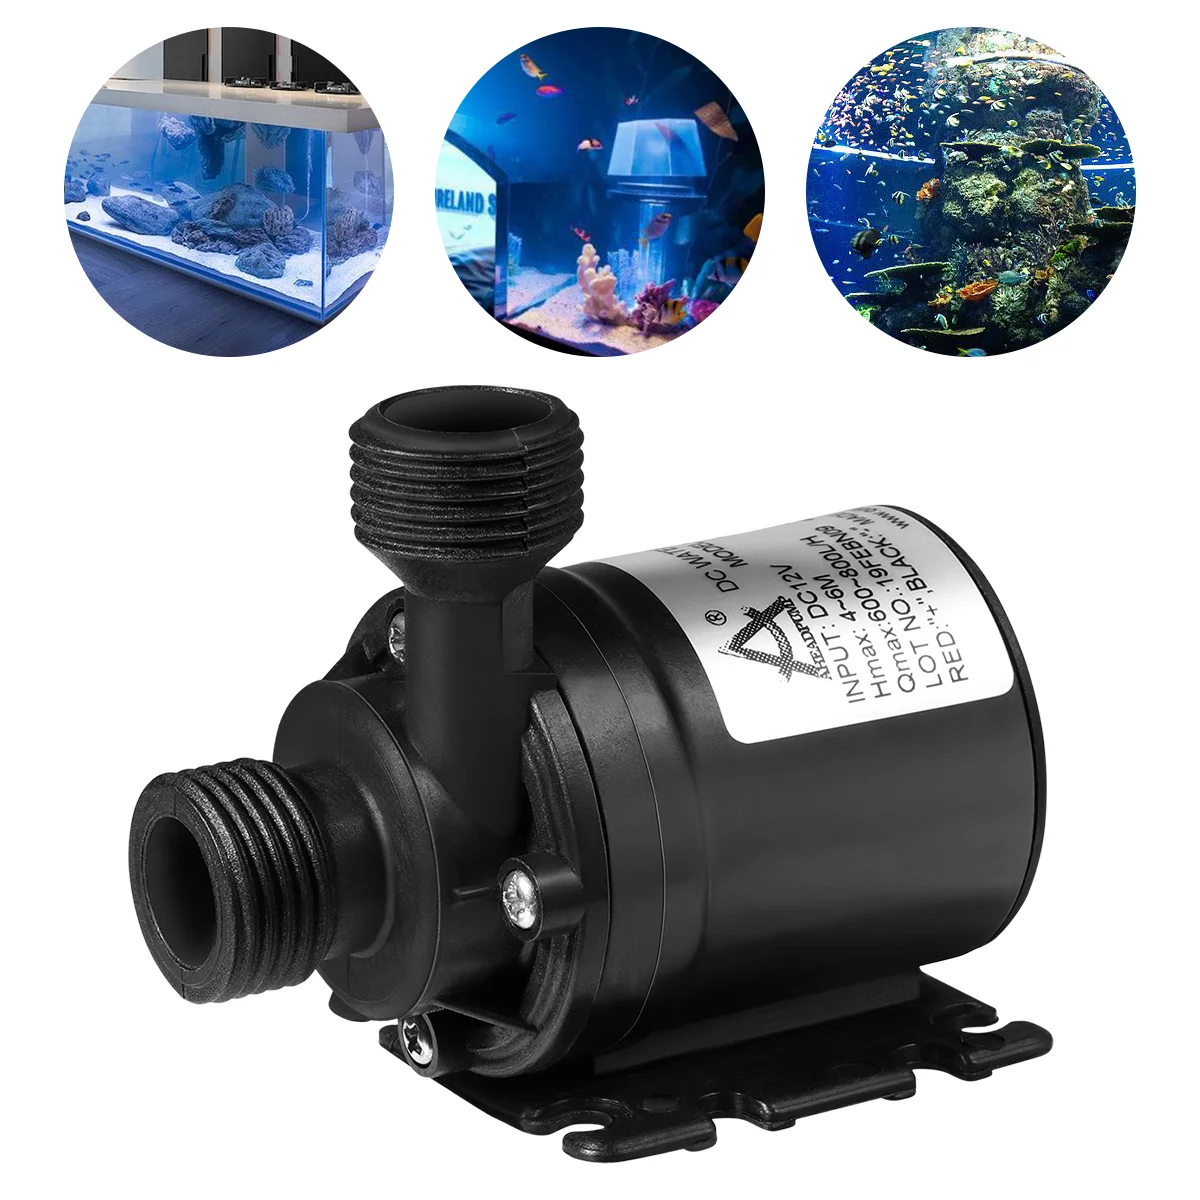 

UEETEK 1PC DC 12V Brushless Submersible Water Pump 800L/H 5M for Fountain Pool Solar Circulation System Water Circulation System